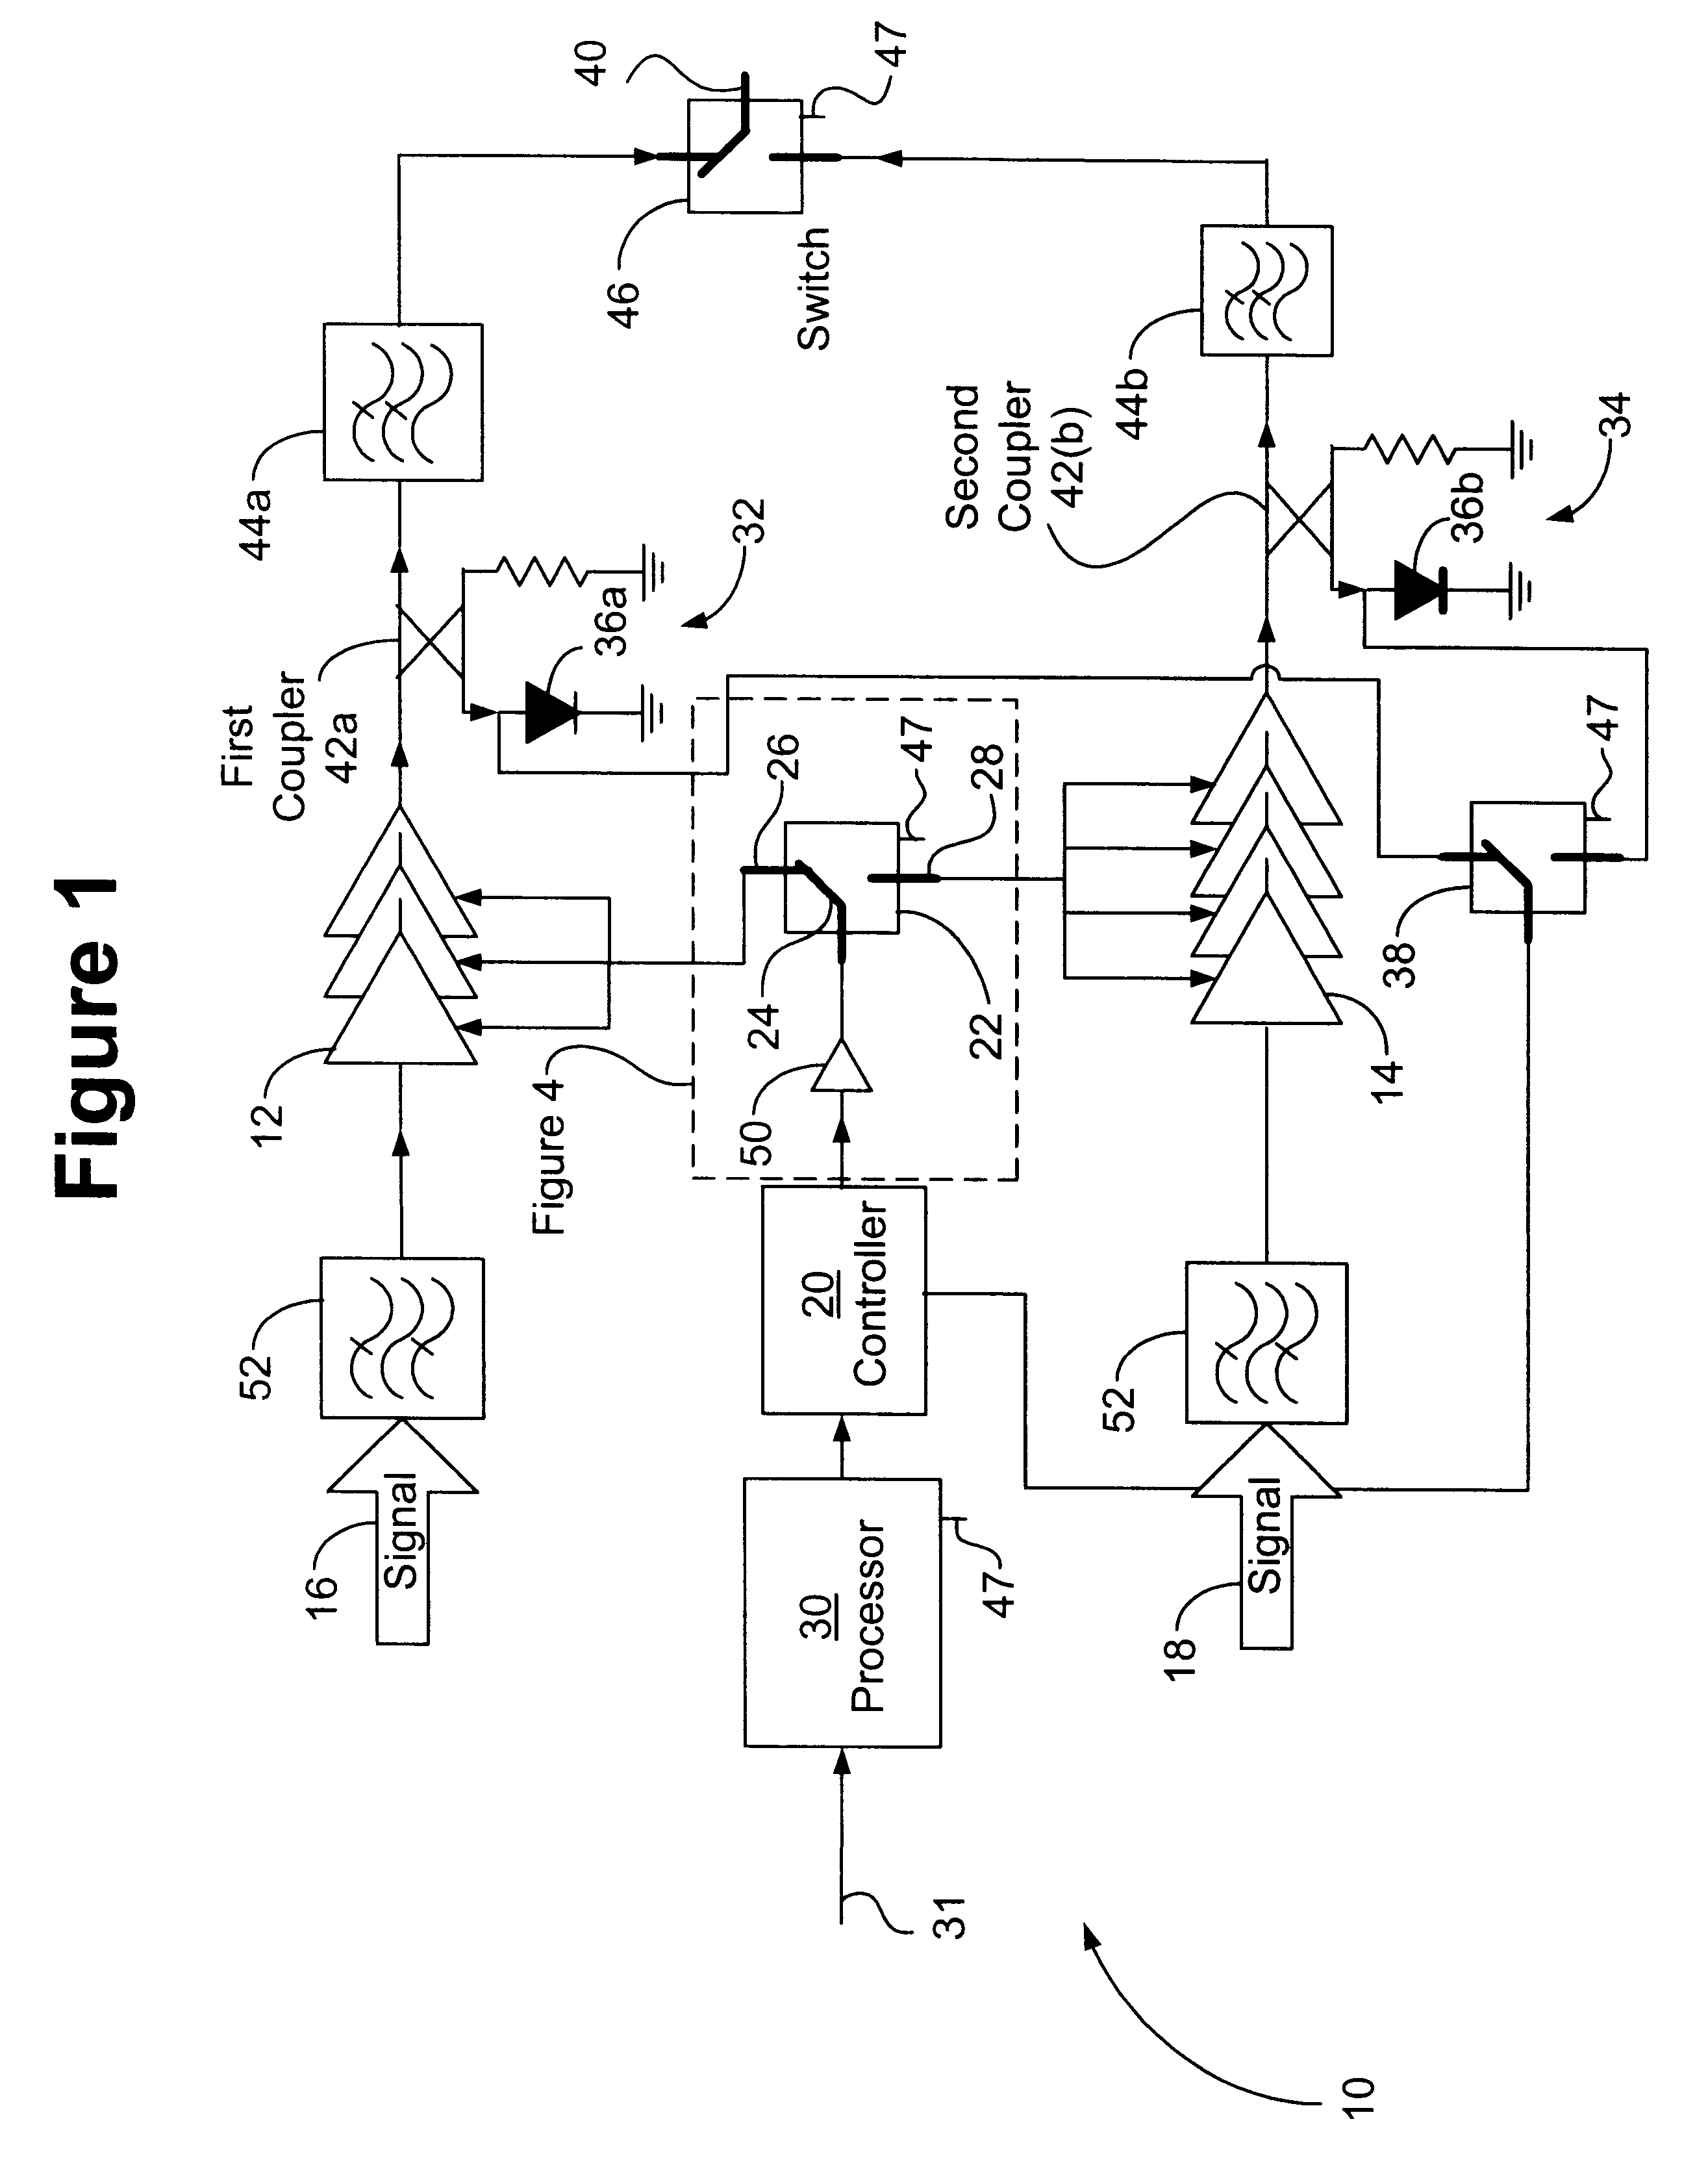 Dualband power amplifier control using a single power amplifier controller